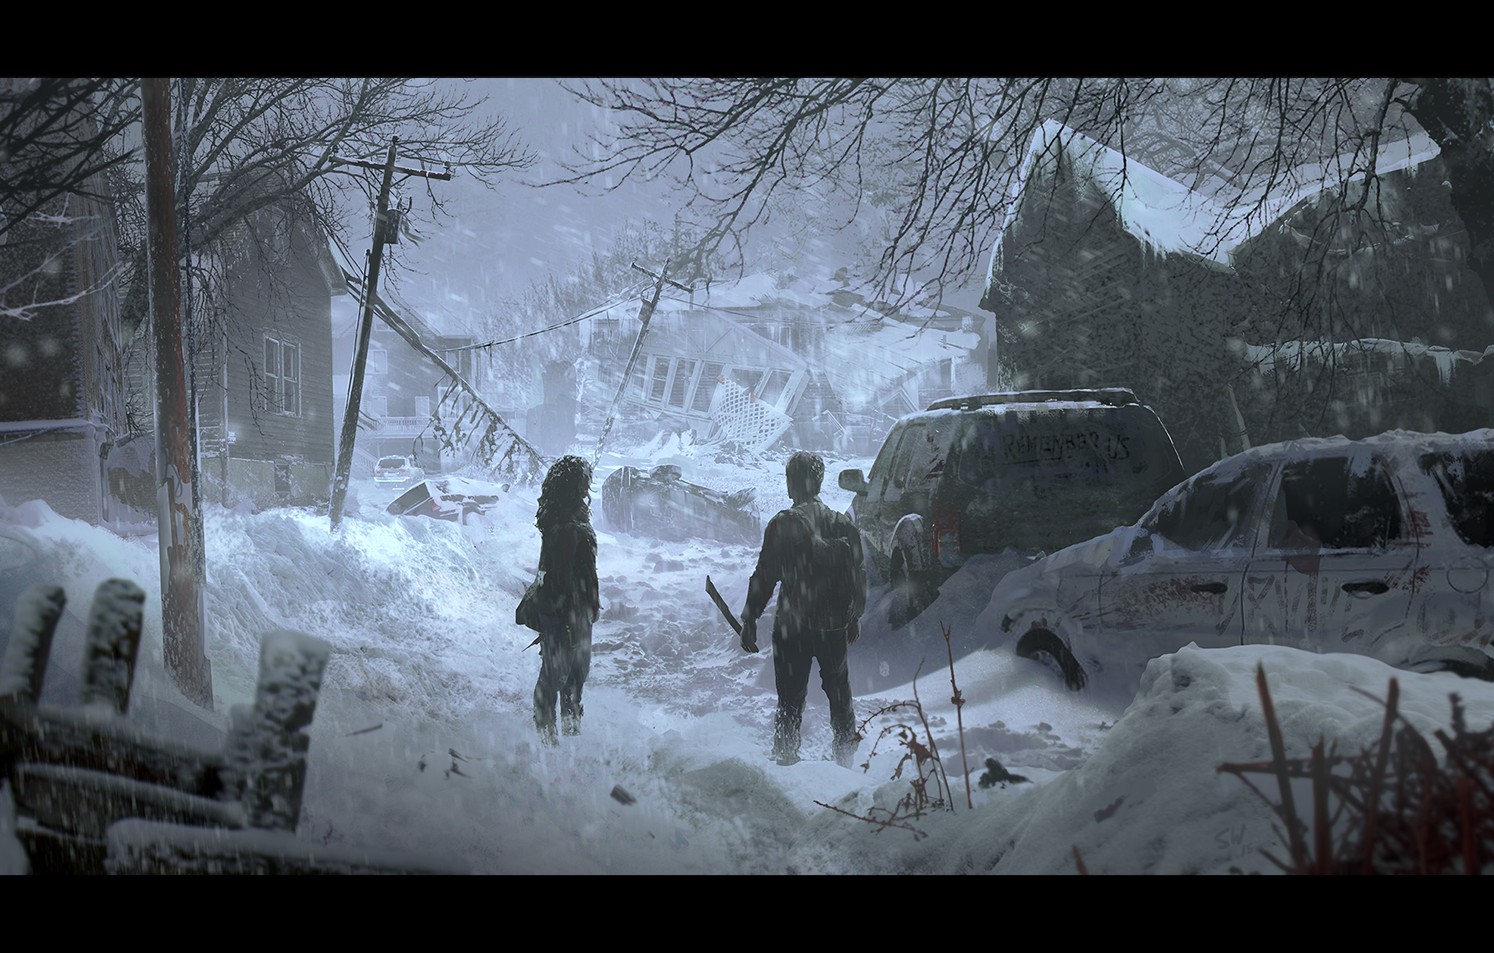 The Last of Us, Snow, Abandoned, Apocalyptic Wallpaper